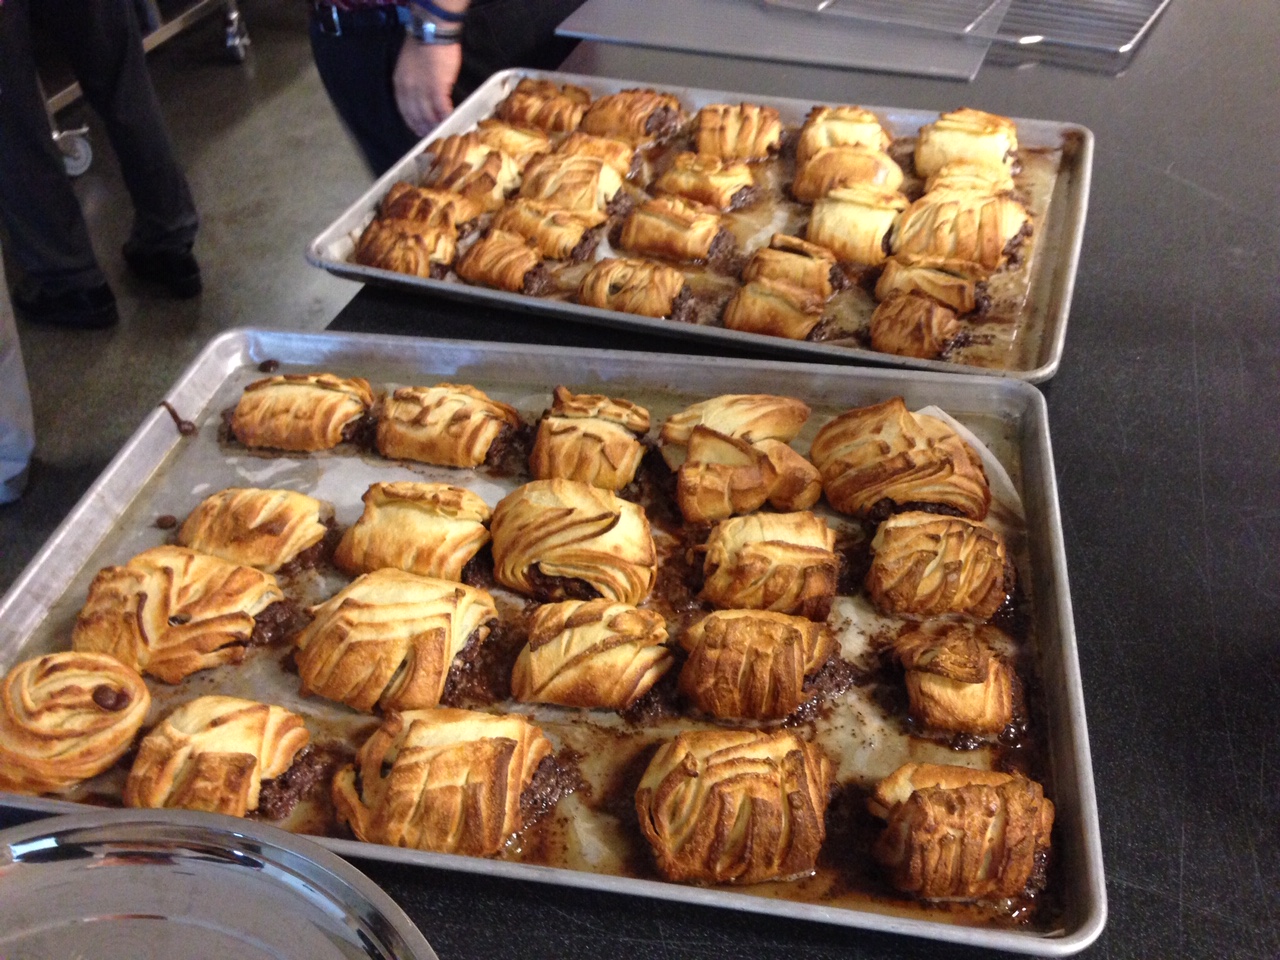 Trays of Puff Pastry After Being Baked